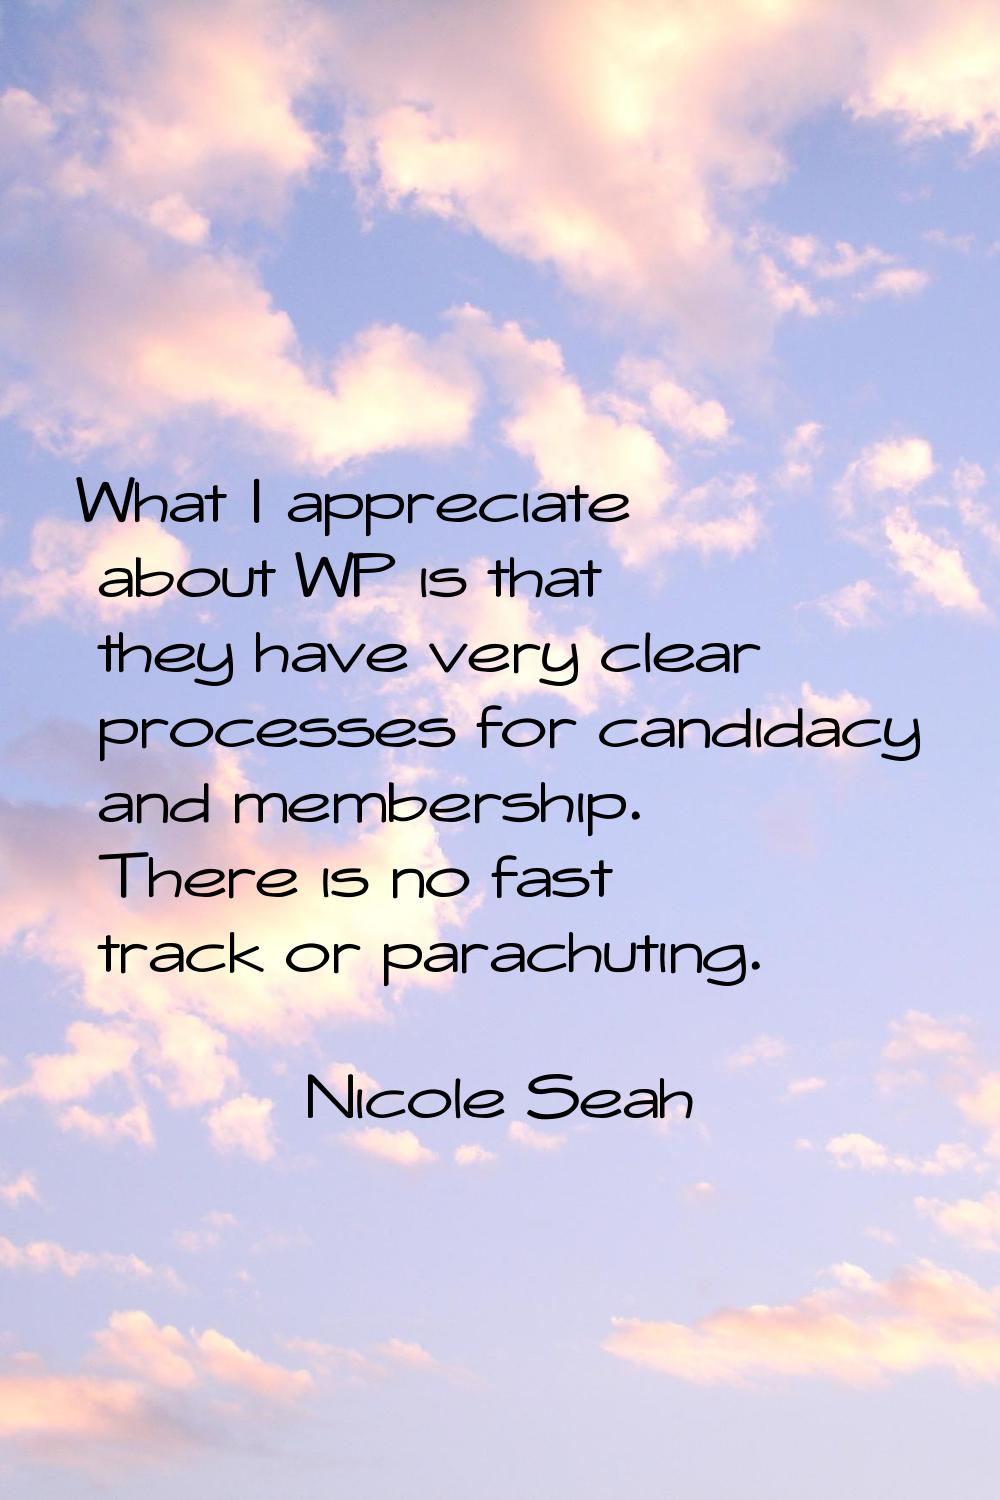 What I appreciate about WP is that they have very clear processes for candidacy and membership. The